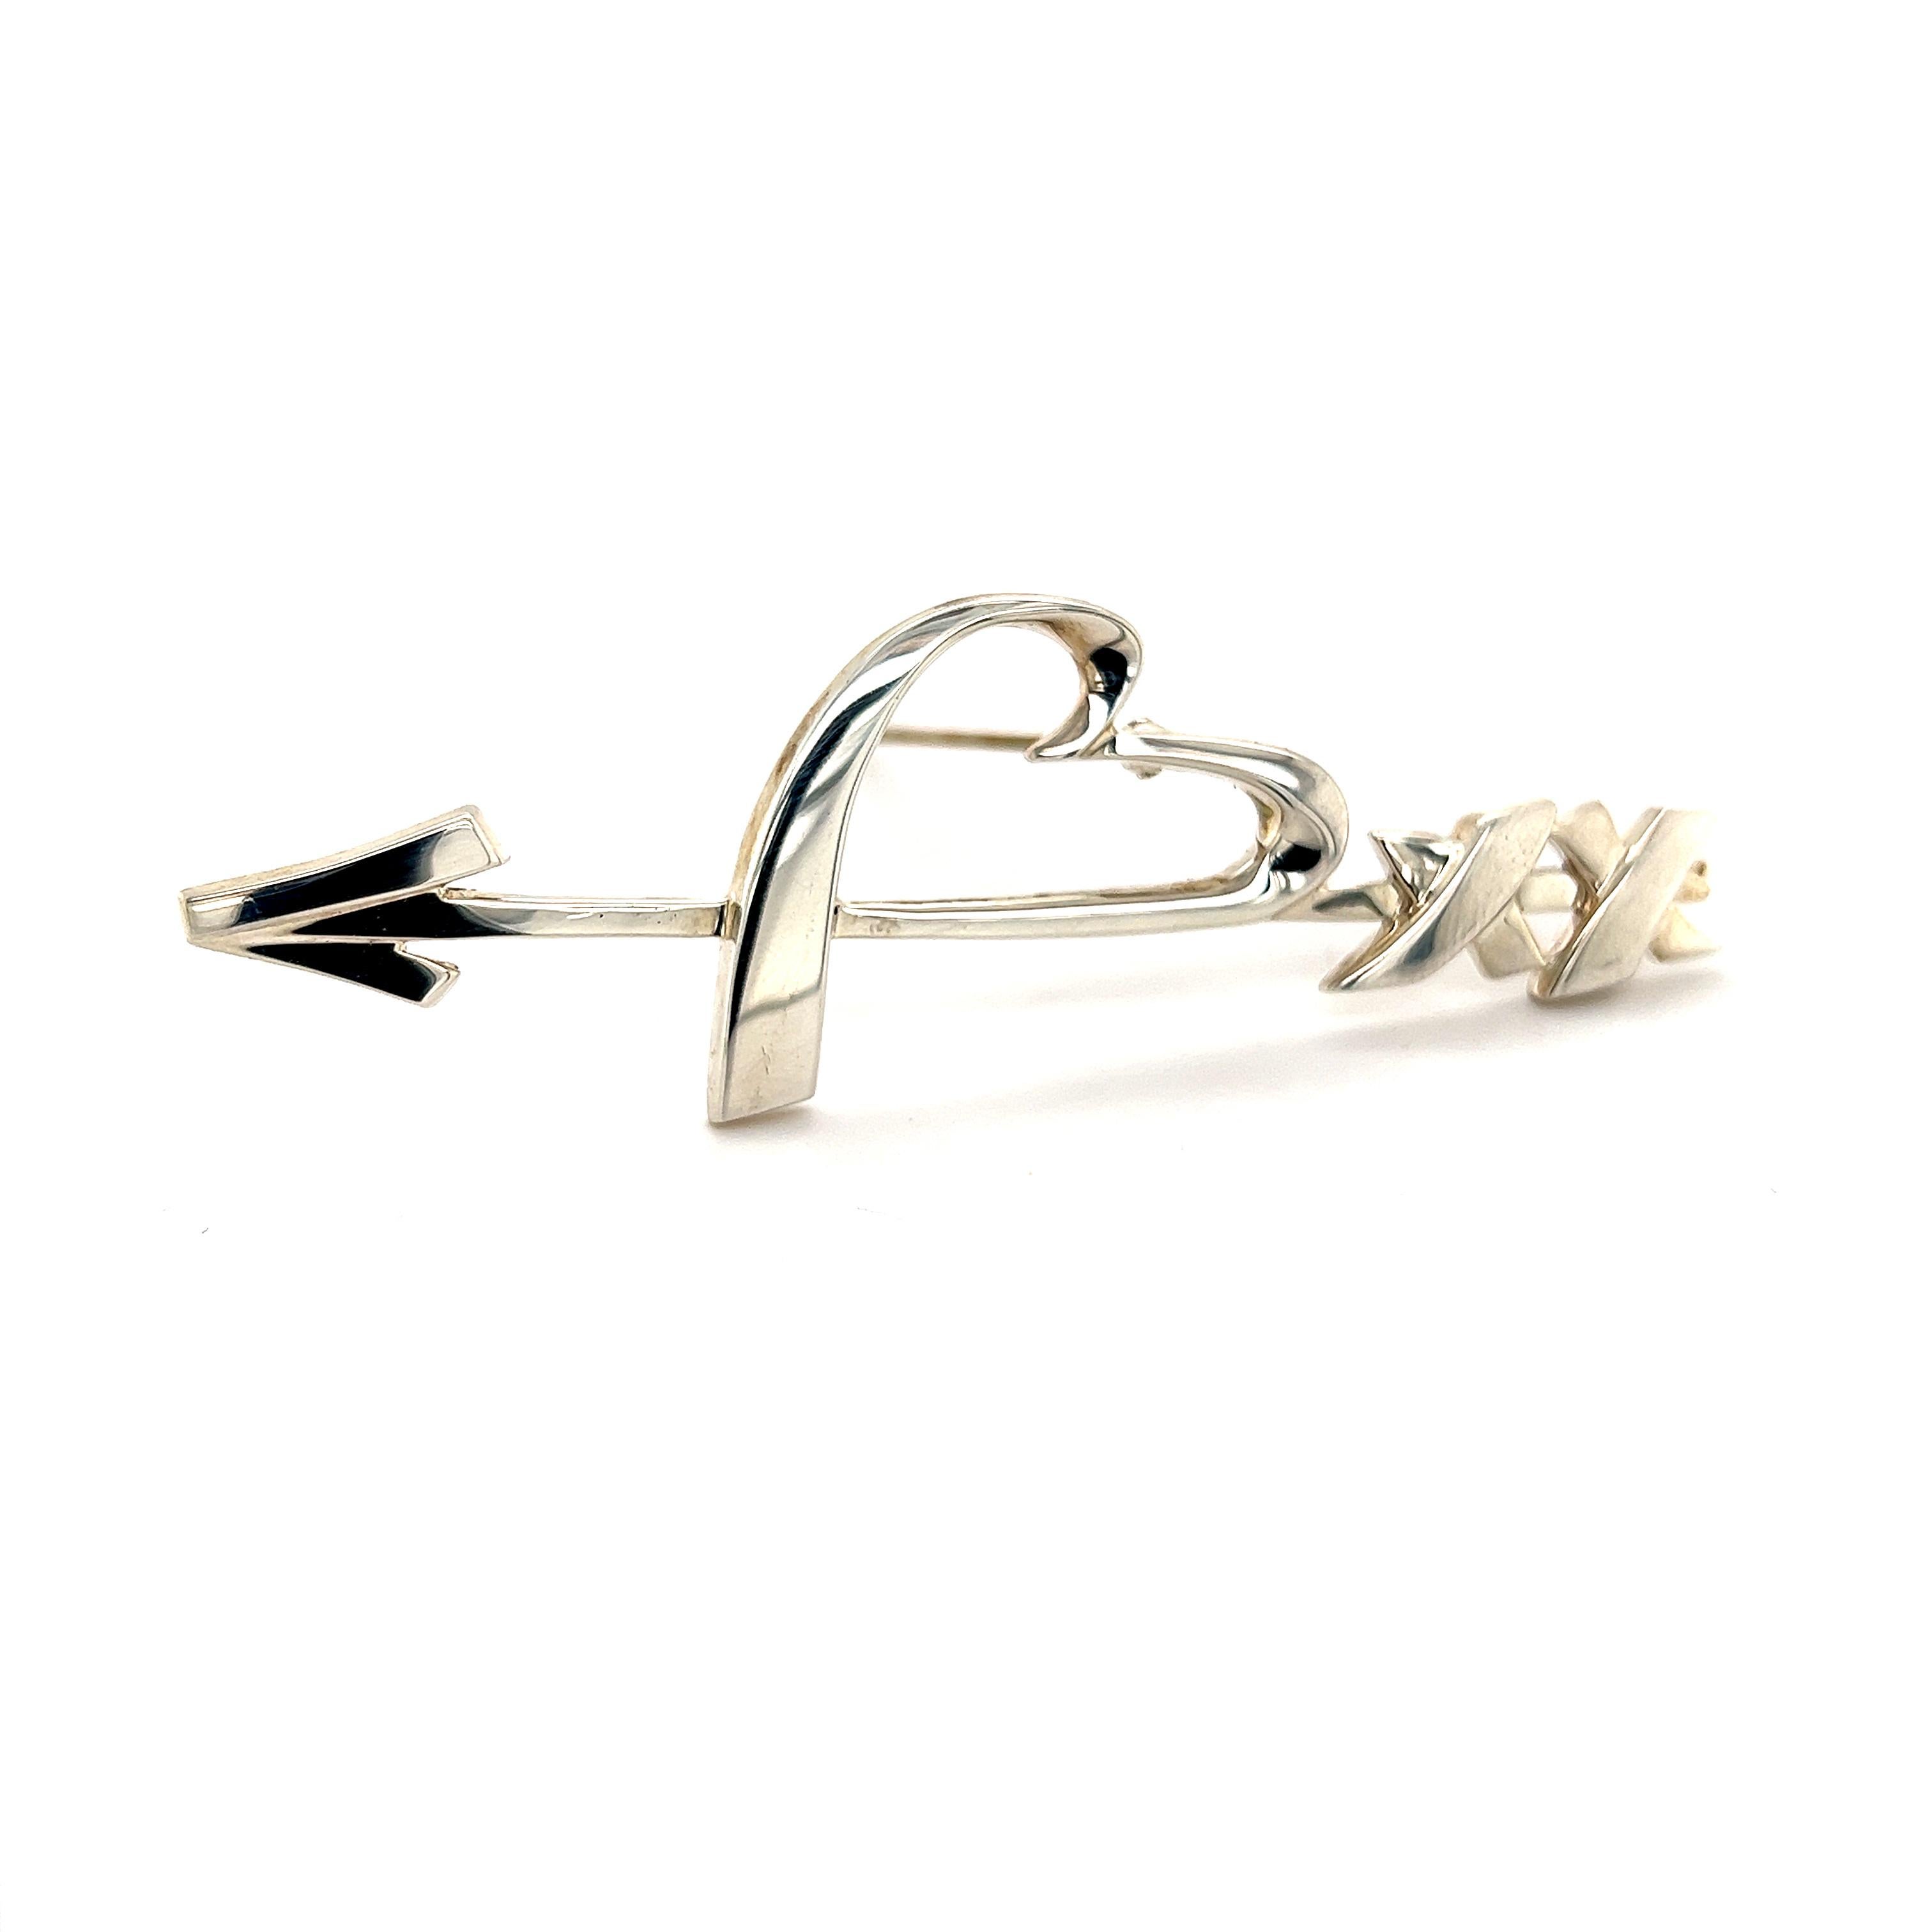 Tiffany & Co Estate Heart & Arrow Brooch Silver By Paloma Picasso TIF583

TRUSTED SELLER SINCE 2002
 
PLEASE SEE OUR HUNDREDS OF POSITIVE FEEDBACKS FROM OUR CLIENTS!!
 
FREE SHIPPING!!
 
DETAILS
Style: Heart & Arrow
Weight: 9.9 Grams
Metal: Sterling